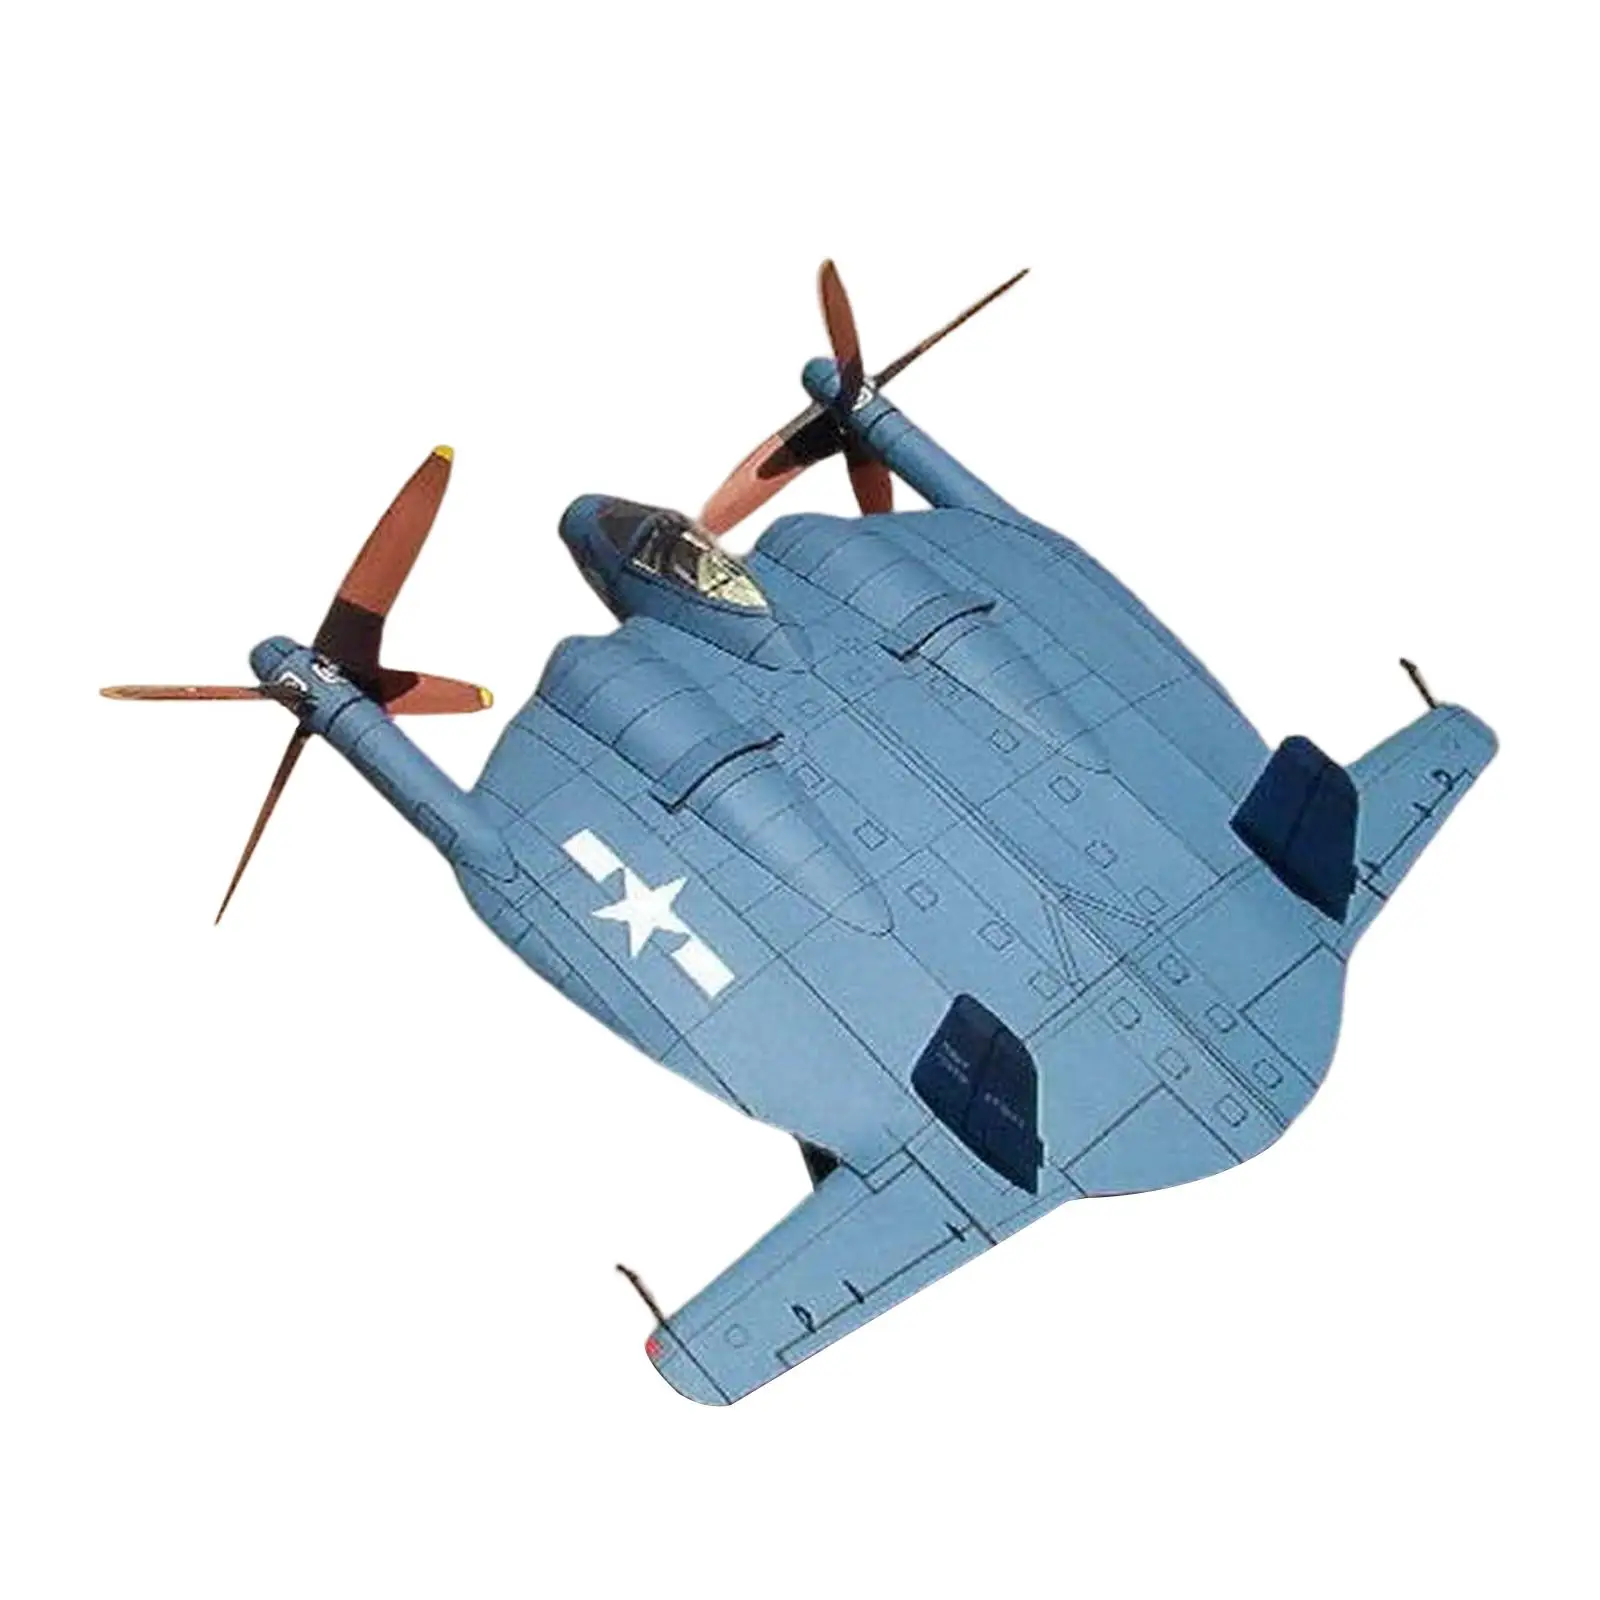 DIY Assemble Fighter Model Toy Aircraft Paper Model Papercraft for Desk Home